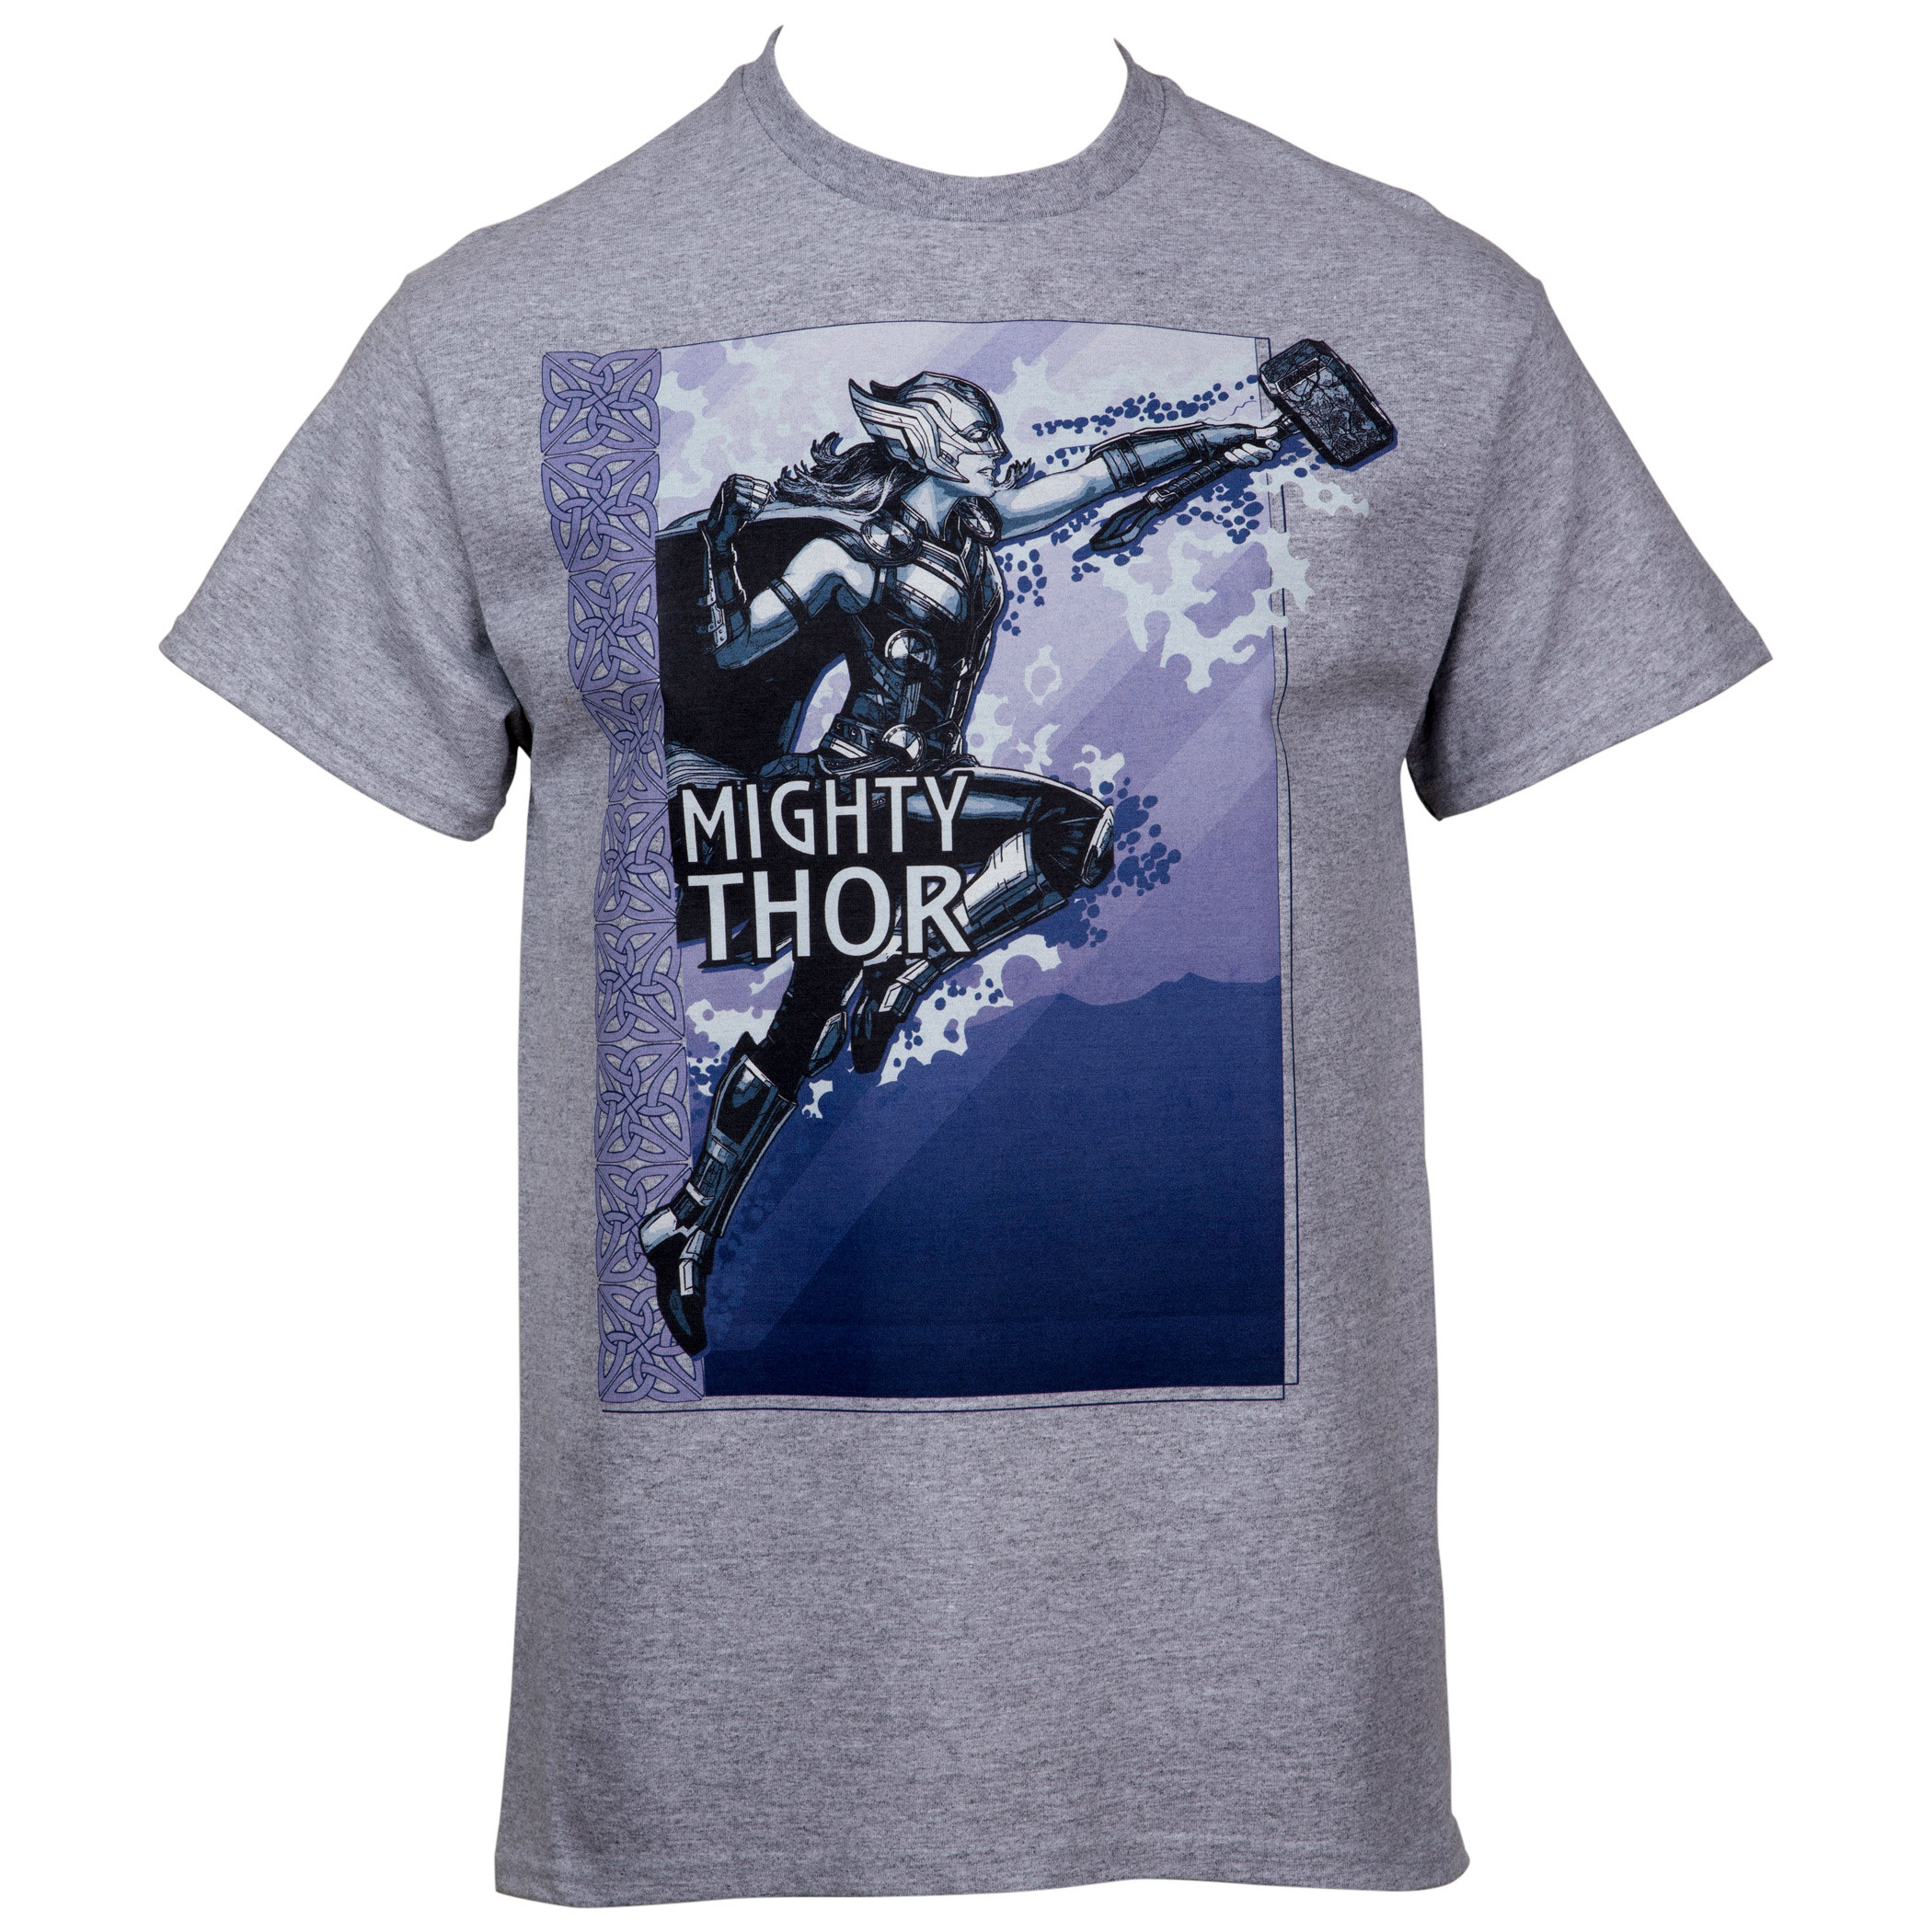 The Mighty Thor Jane Foster Cover Art T-Shirt